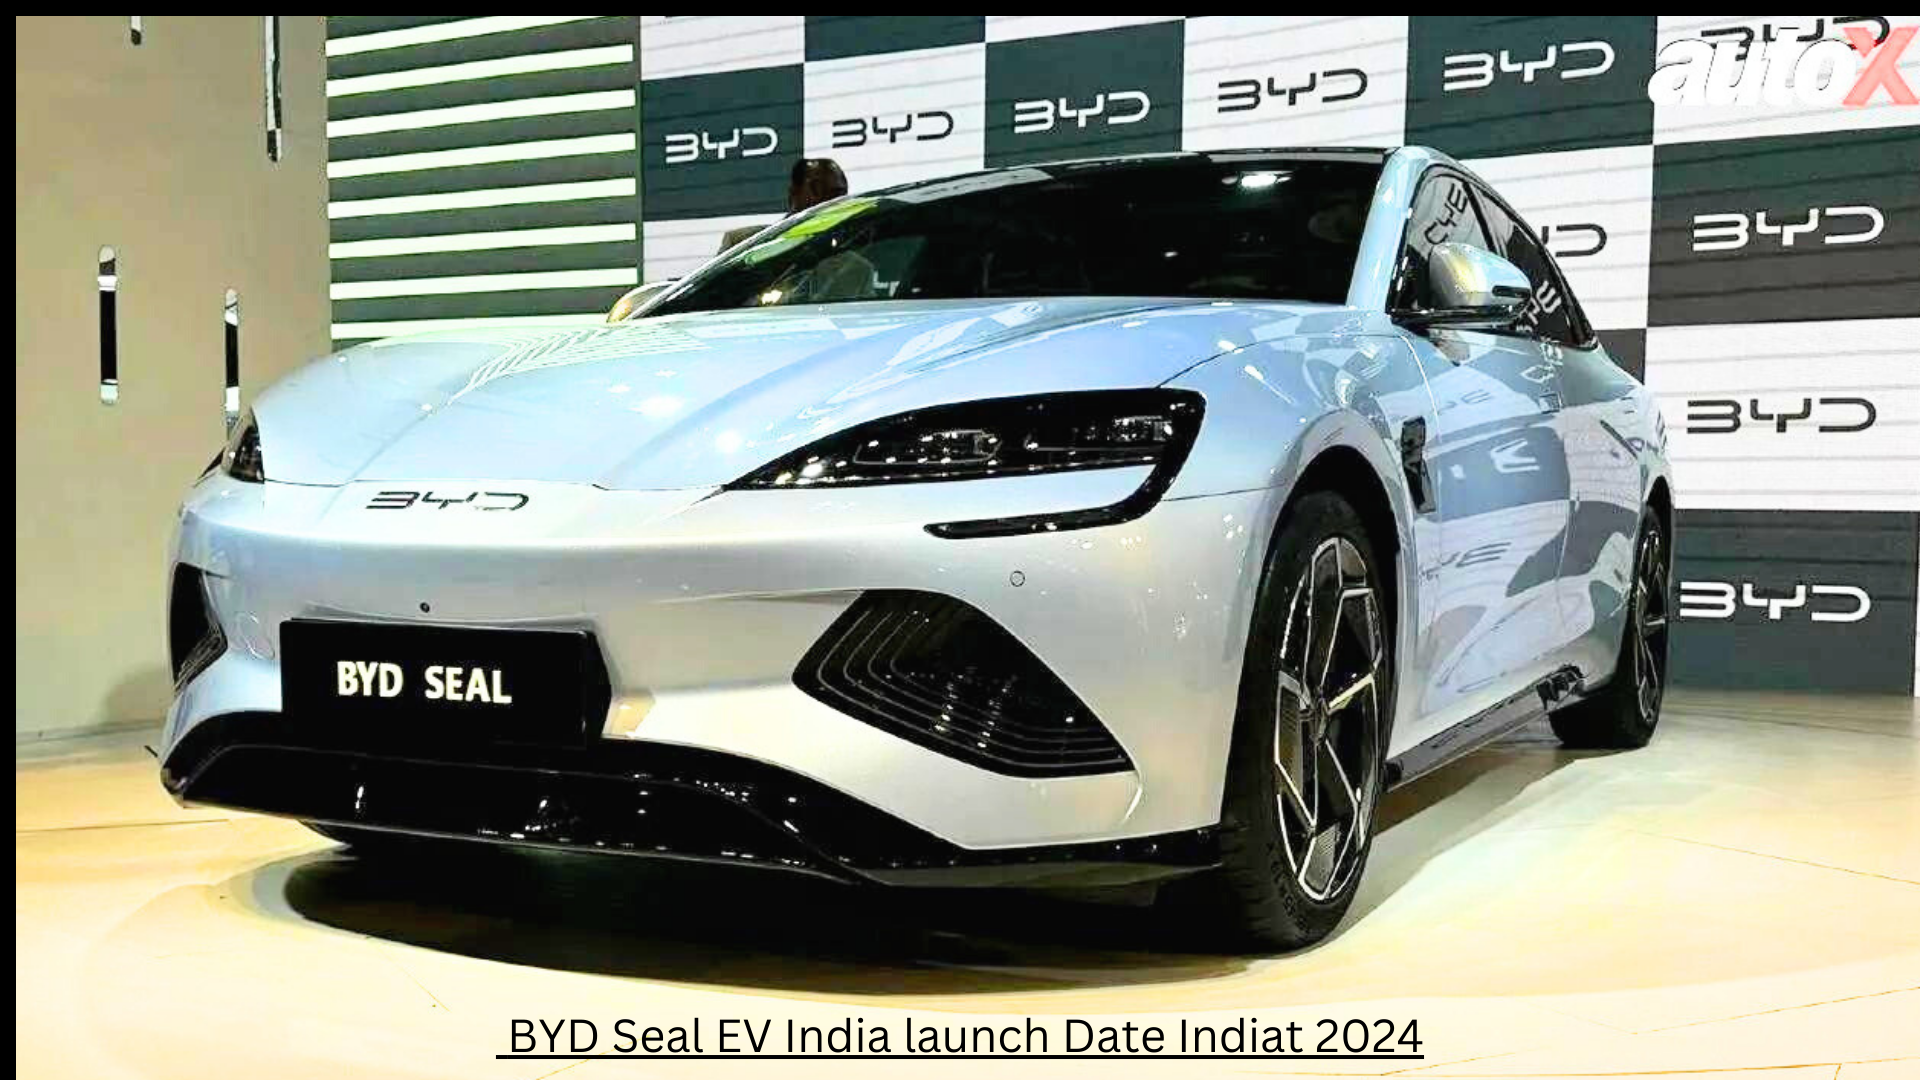 BYD Seal EV launch Date IN India